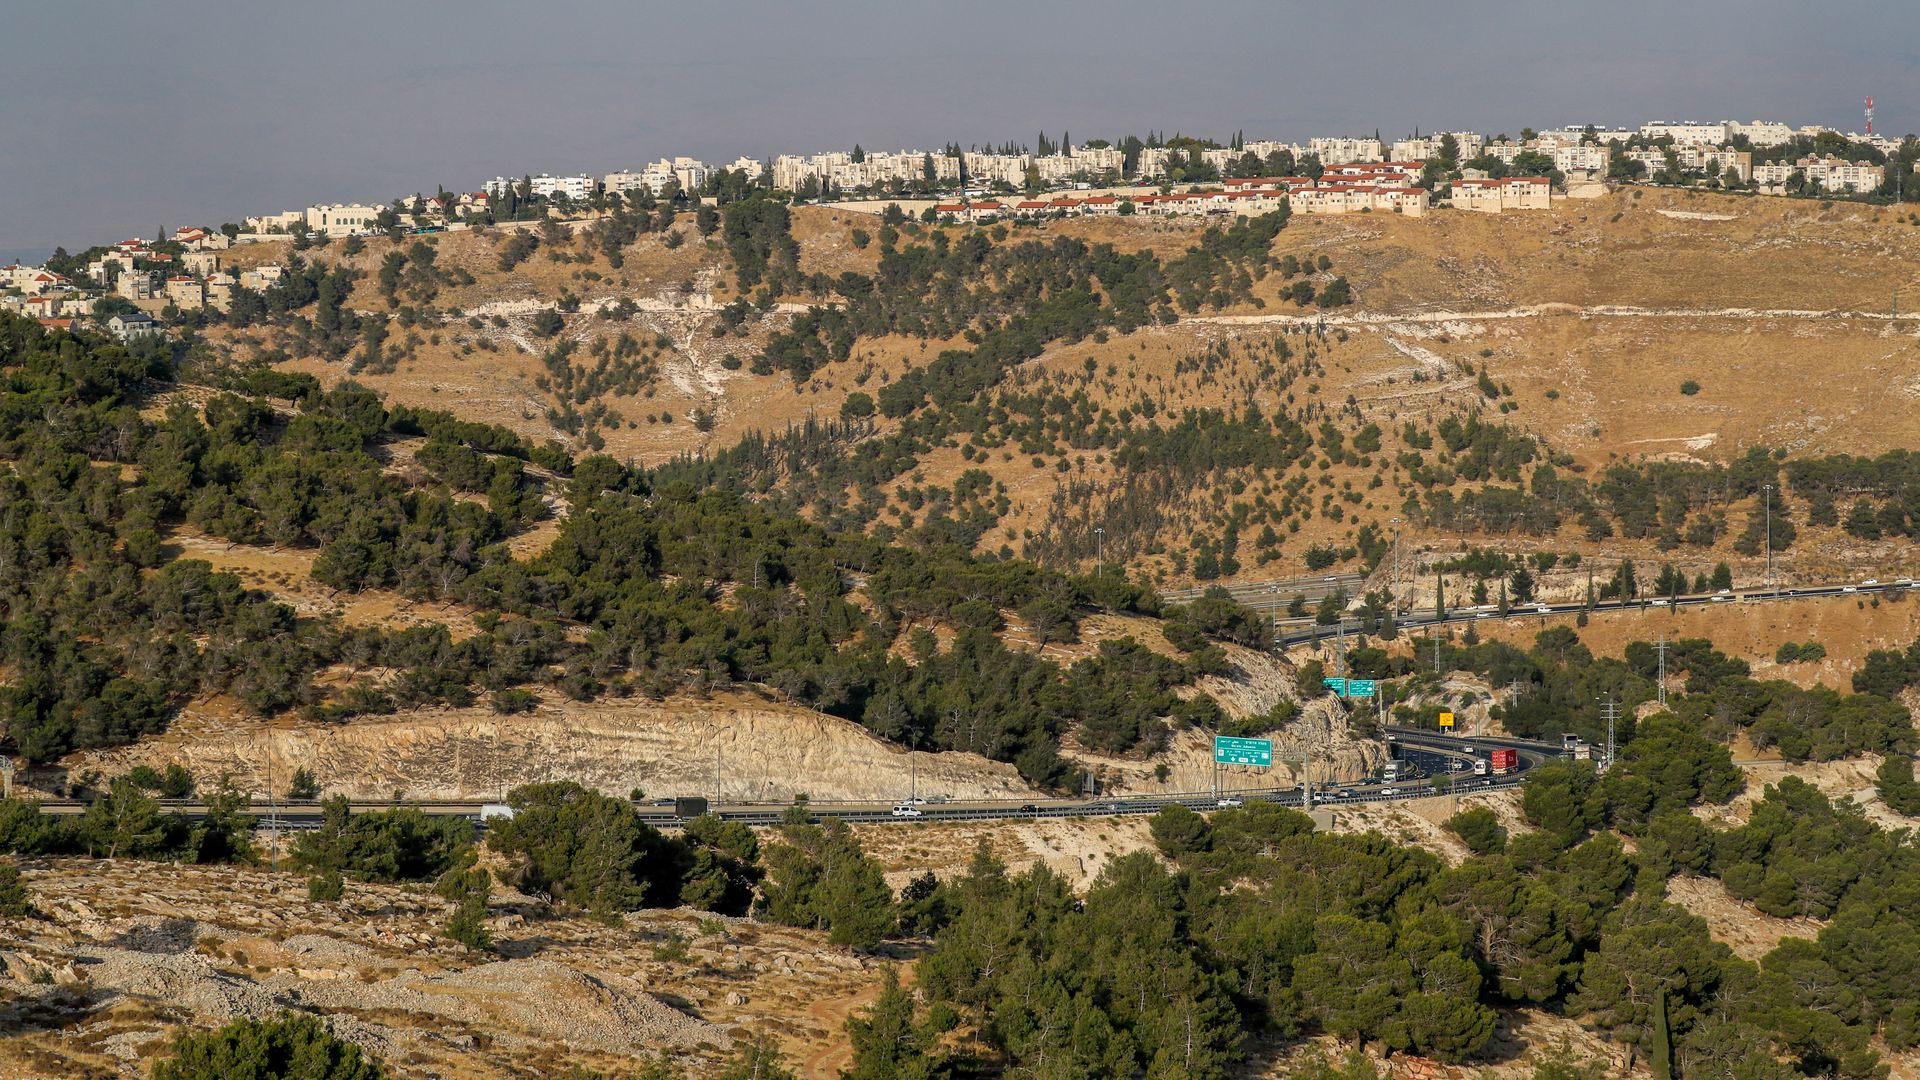 A picture taken from the E1 corridor, a super-sensitive area of the occupied West Bank, shows Israeli settlement of Maale Adumim i